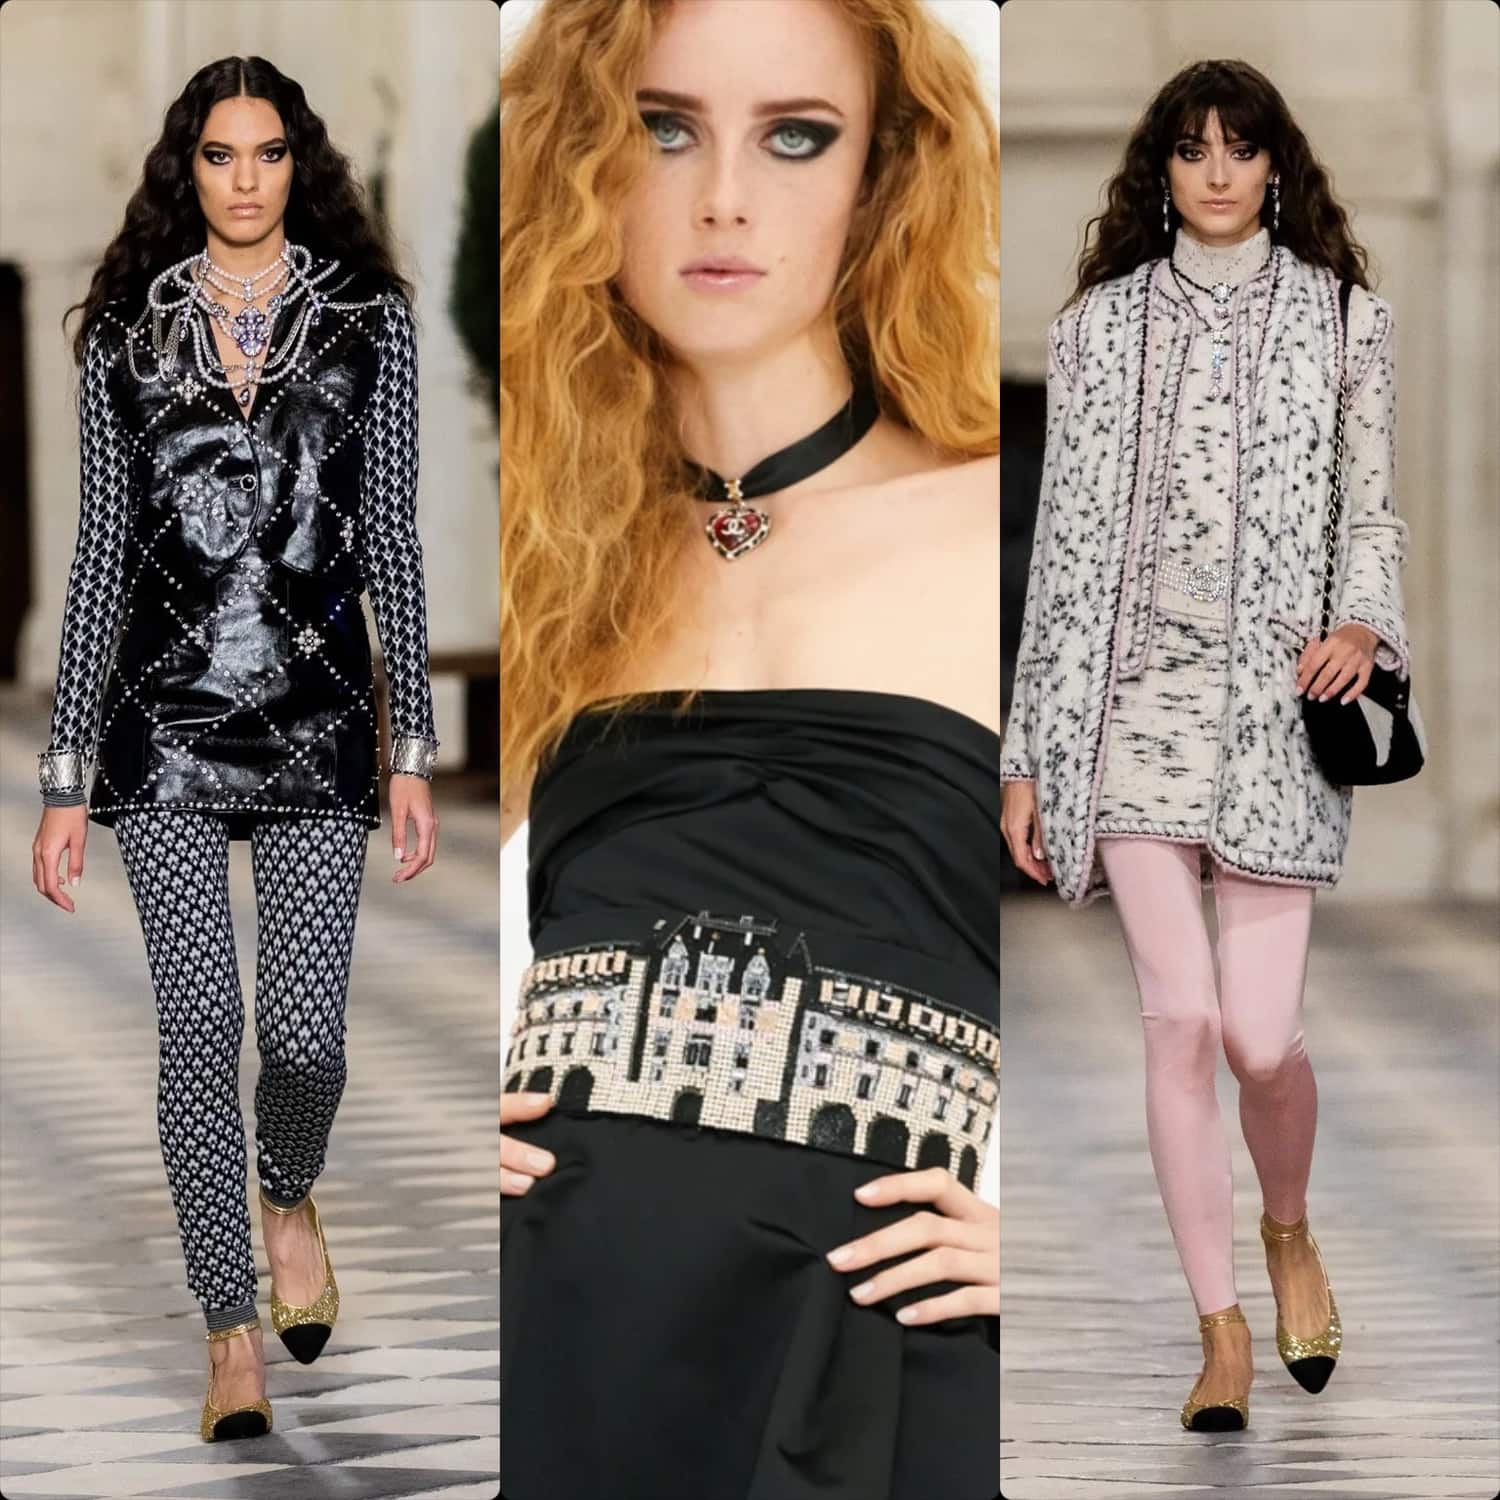 Chanel Pre-Fall 2021 Métiers d’art. RUNWAY MAGAZINE ® Collections. RUNWAY NOW / RUNWAY NEW